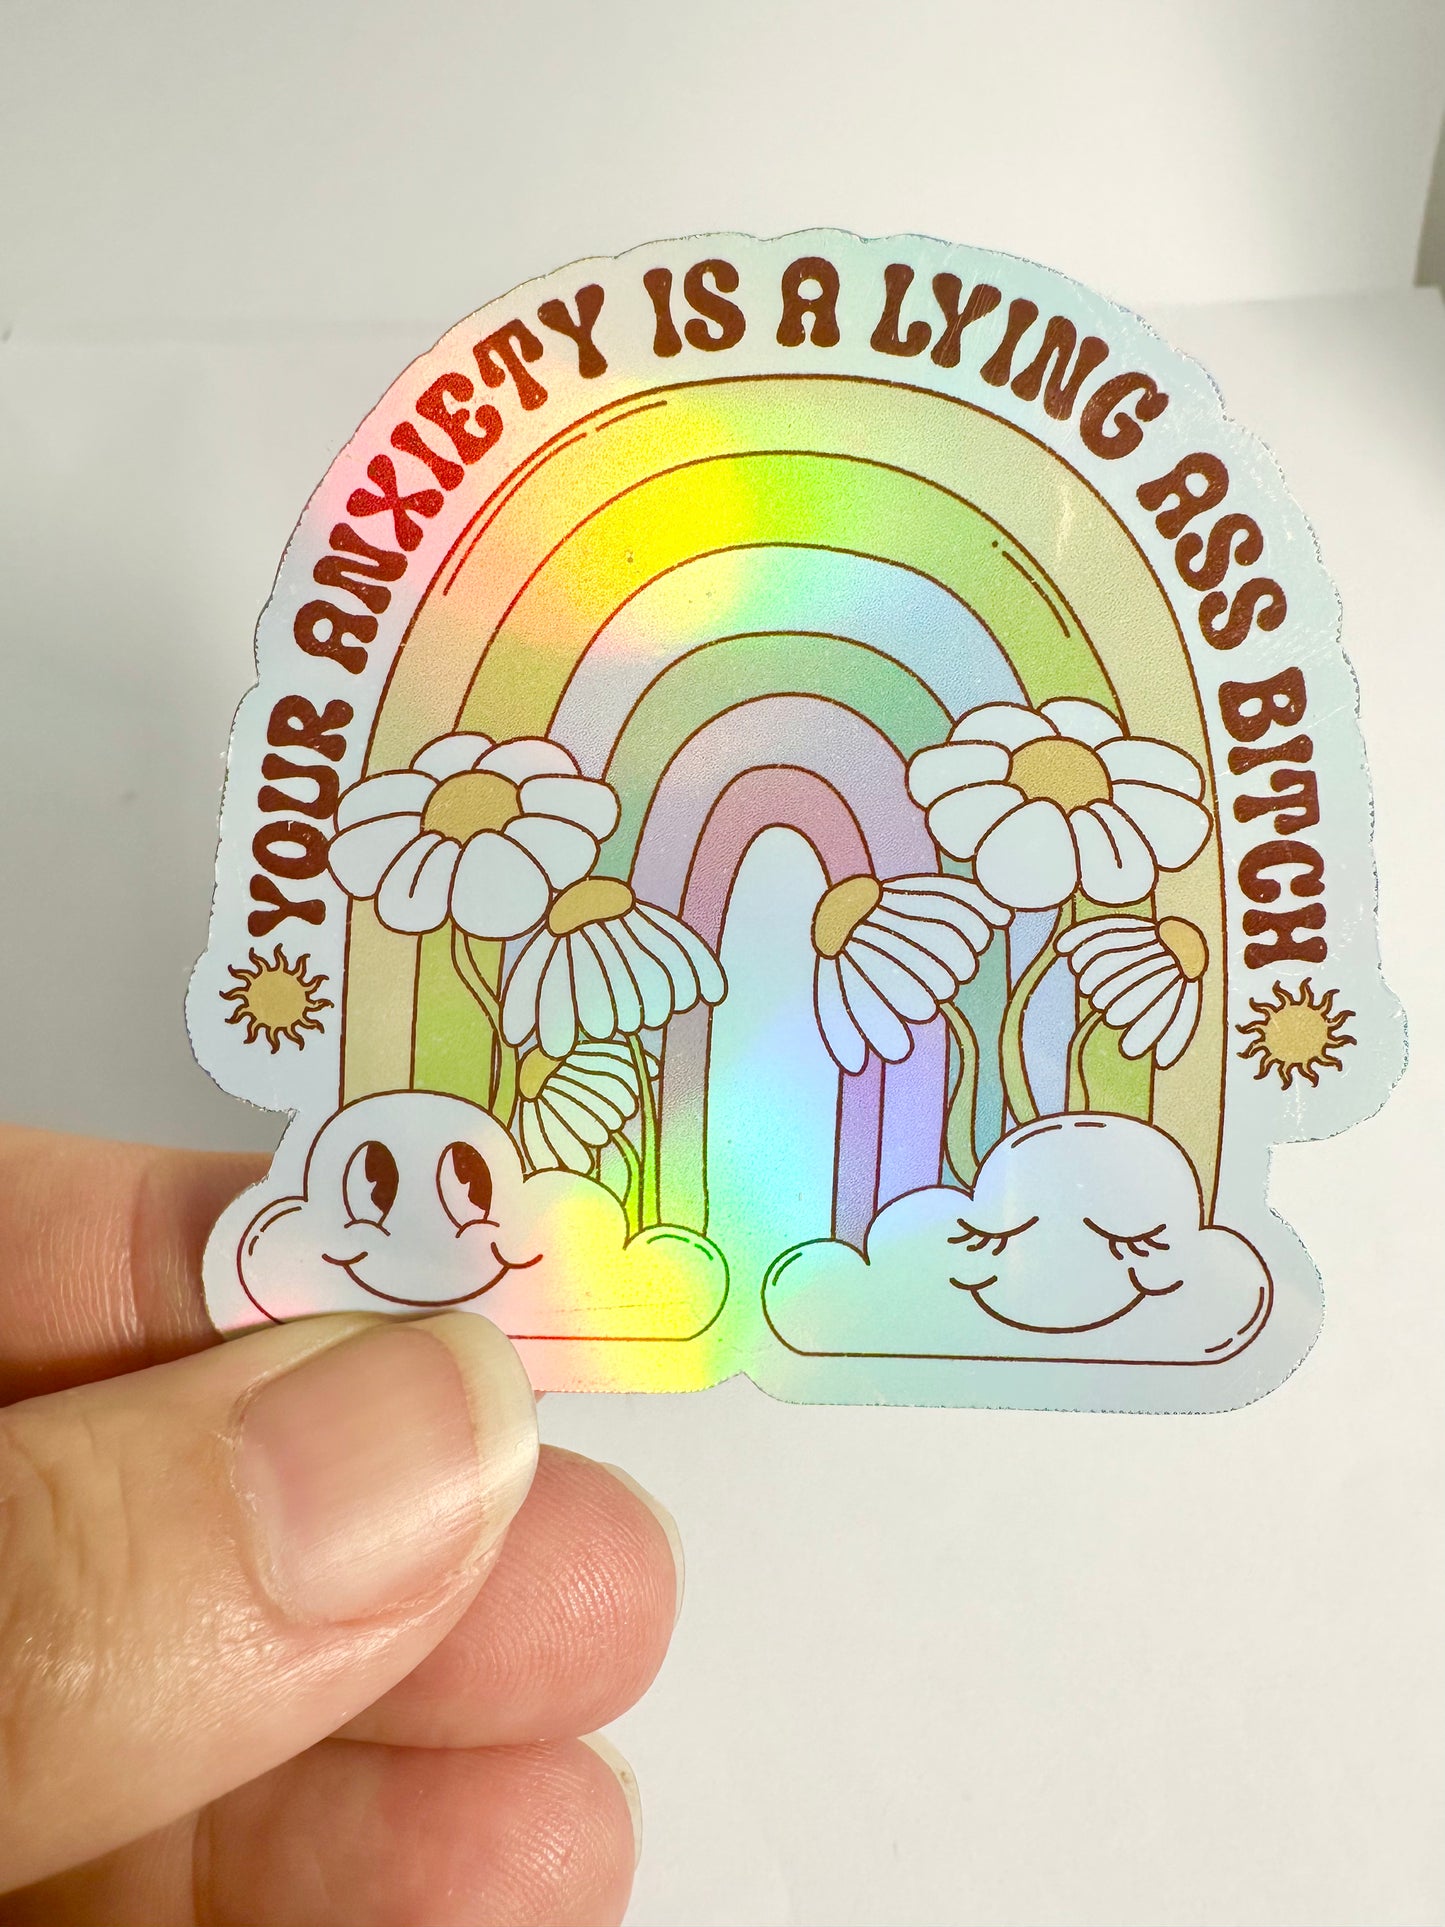 Your Anxiety is a Lying Sticker Holo